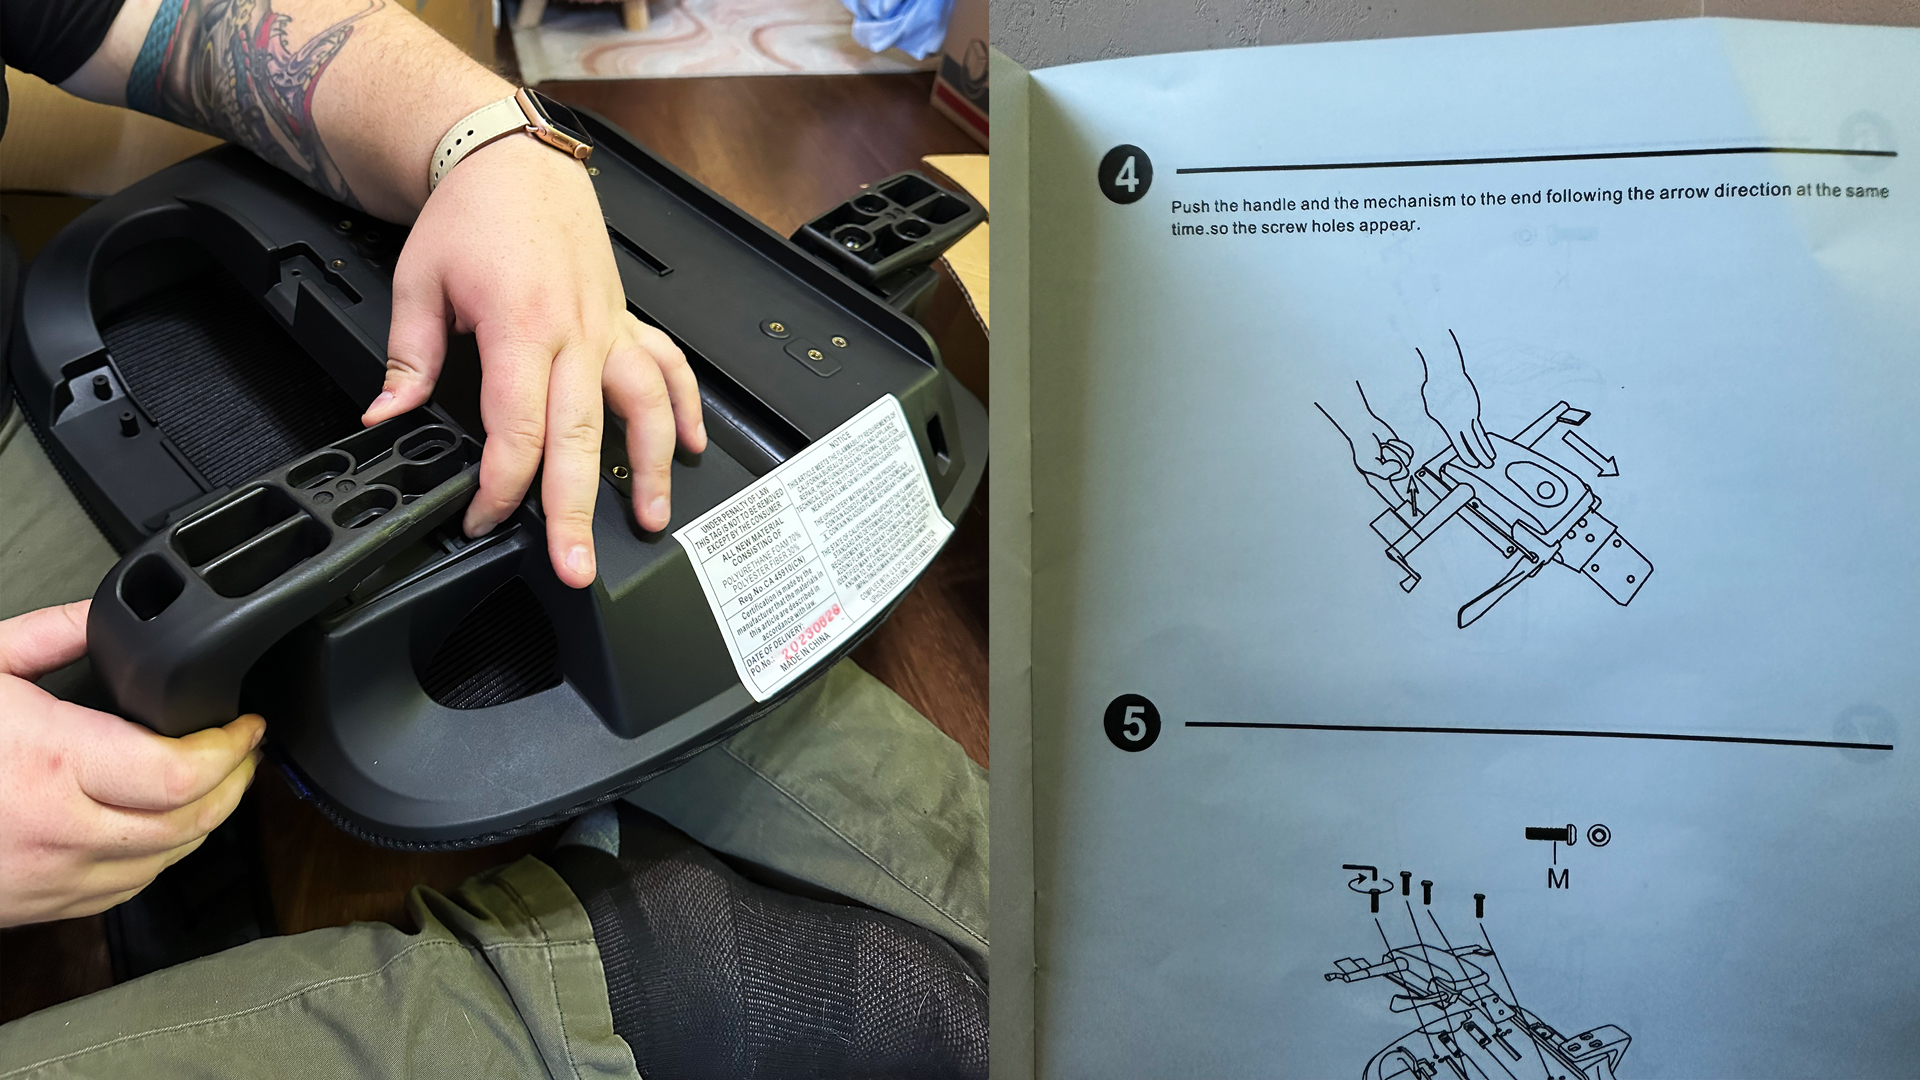 The paper instruction guide for the FlexiSpot C7 office chair